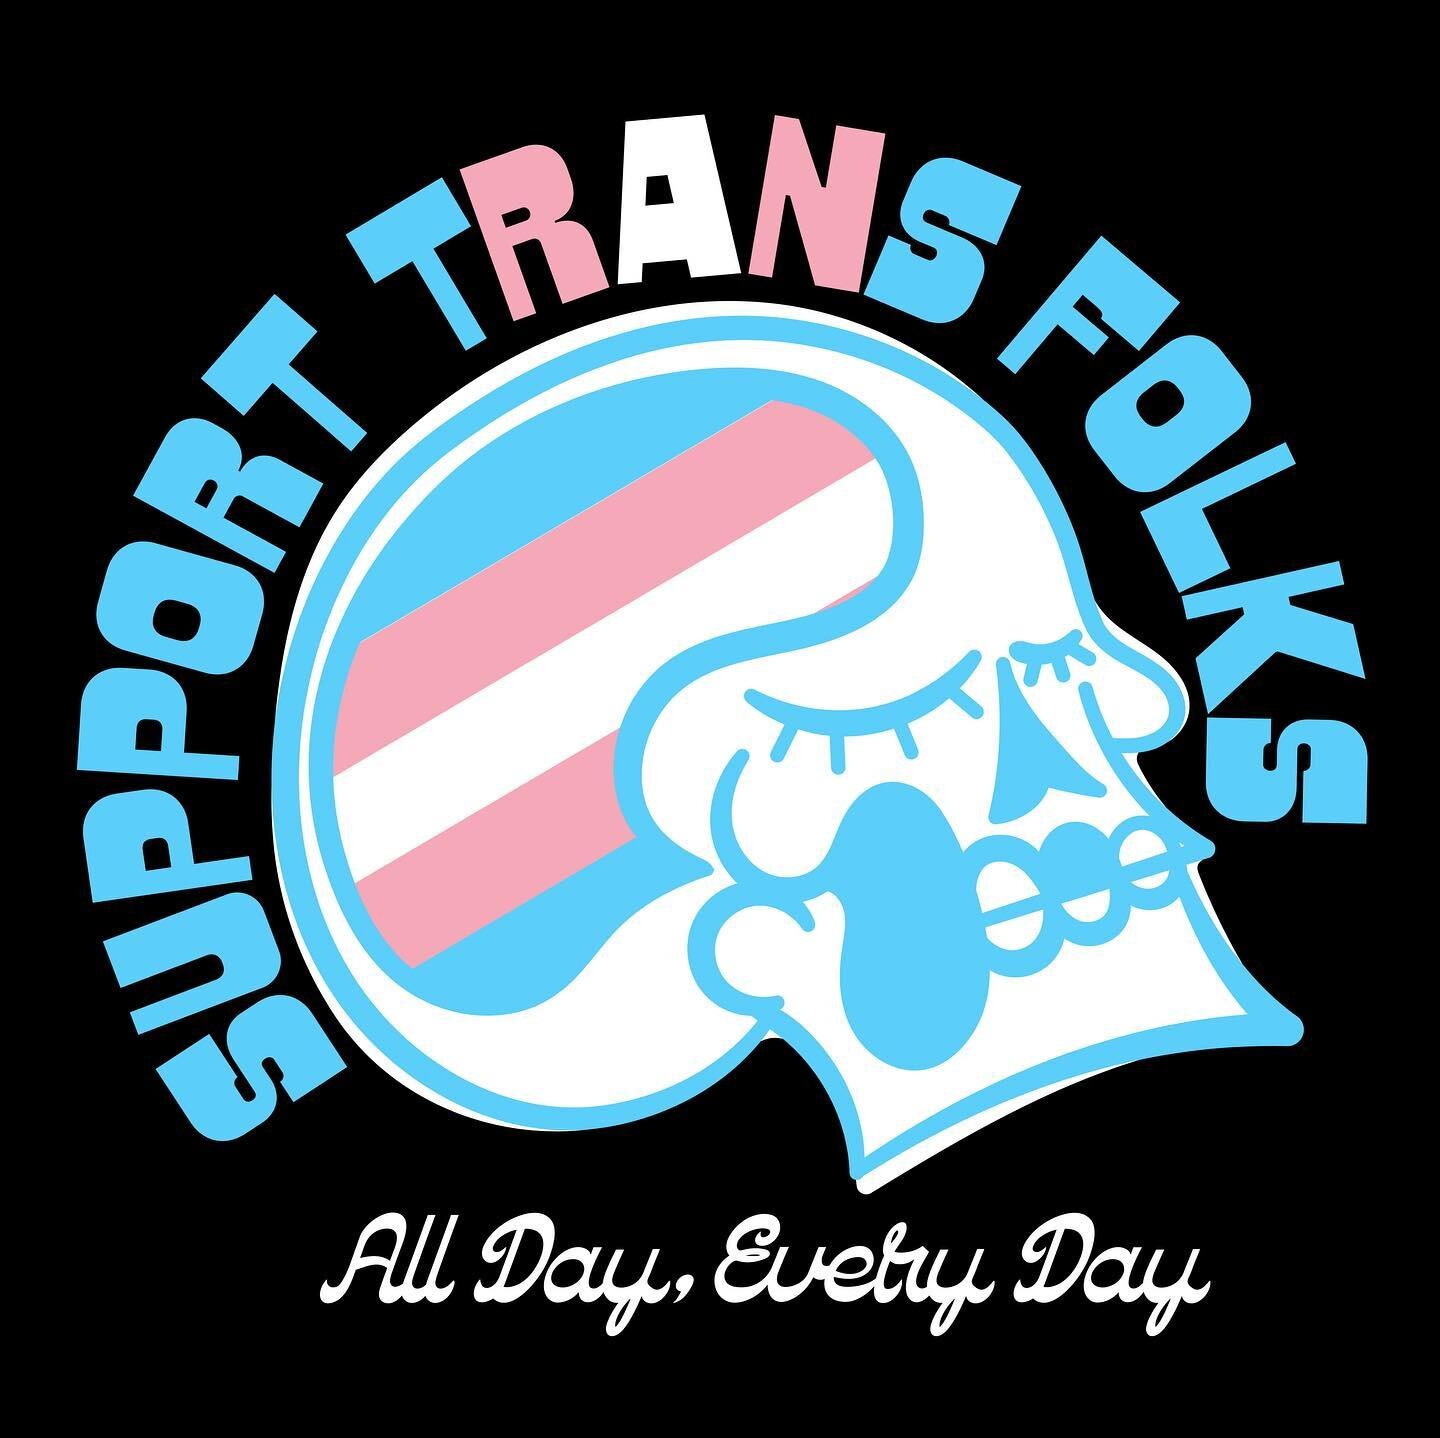 Can't stop won't stop. Thinking of all my trans siblings today. Love and support the trans people in your life. All day every day. #transdayofvisibility